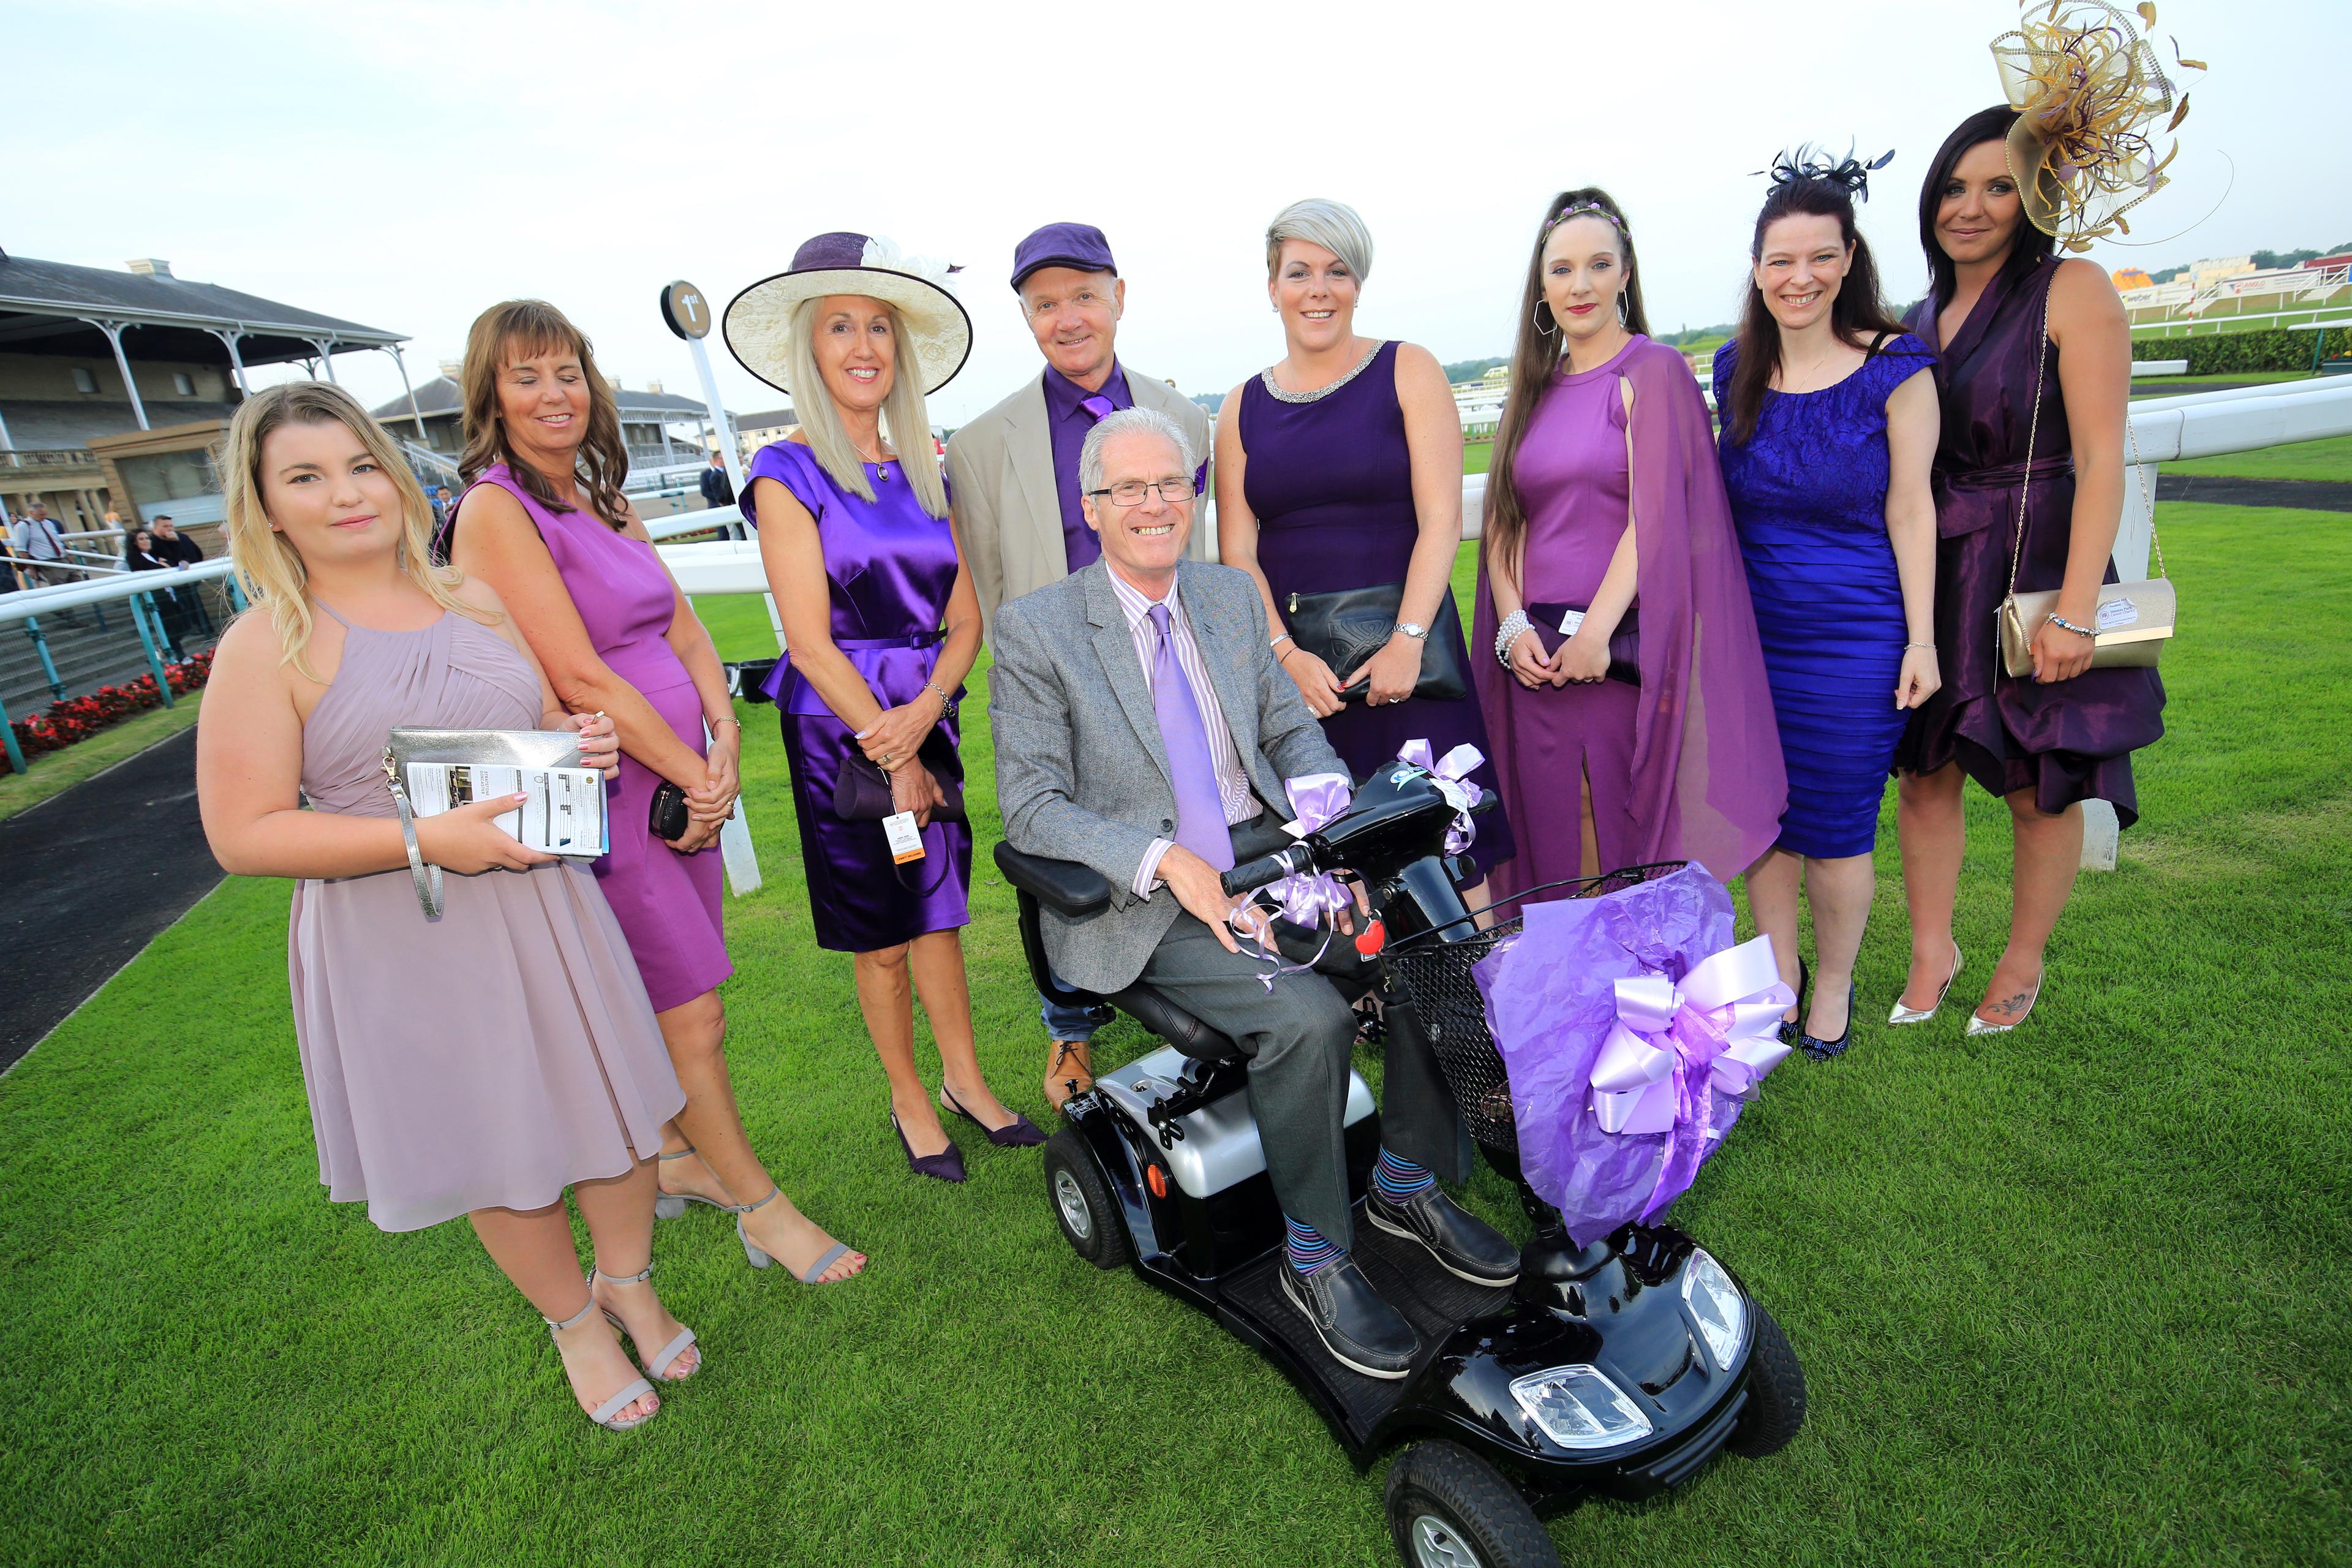 A group of people - seven women and one man - stand facing the camera, with another man sitting on a mobility scooter in the foreground. All those pictured are well-dressed, and are pictured outside at the Weston Park Cancer Charity Race Evening at Doncaster Racecourse.